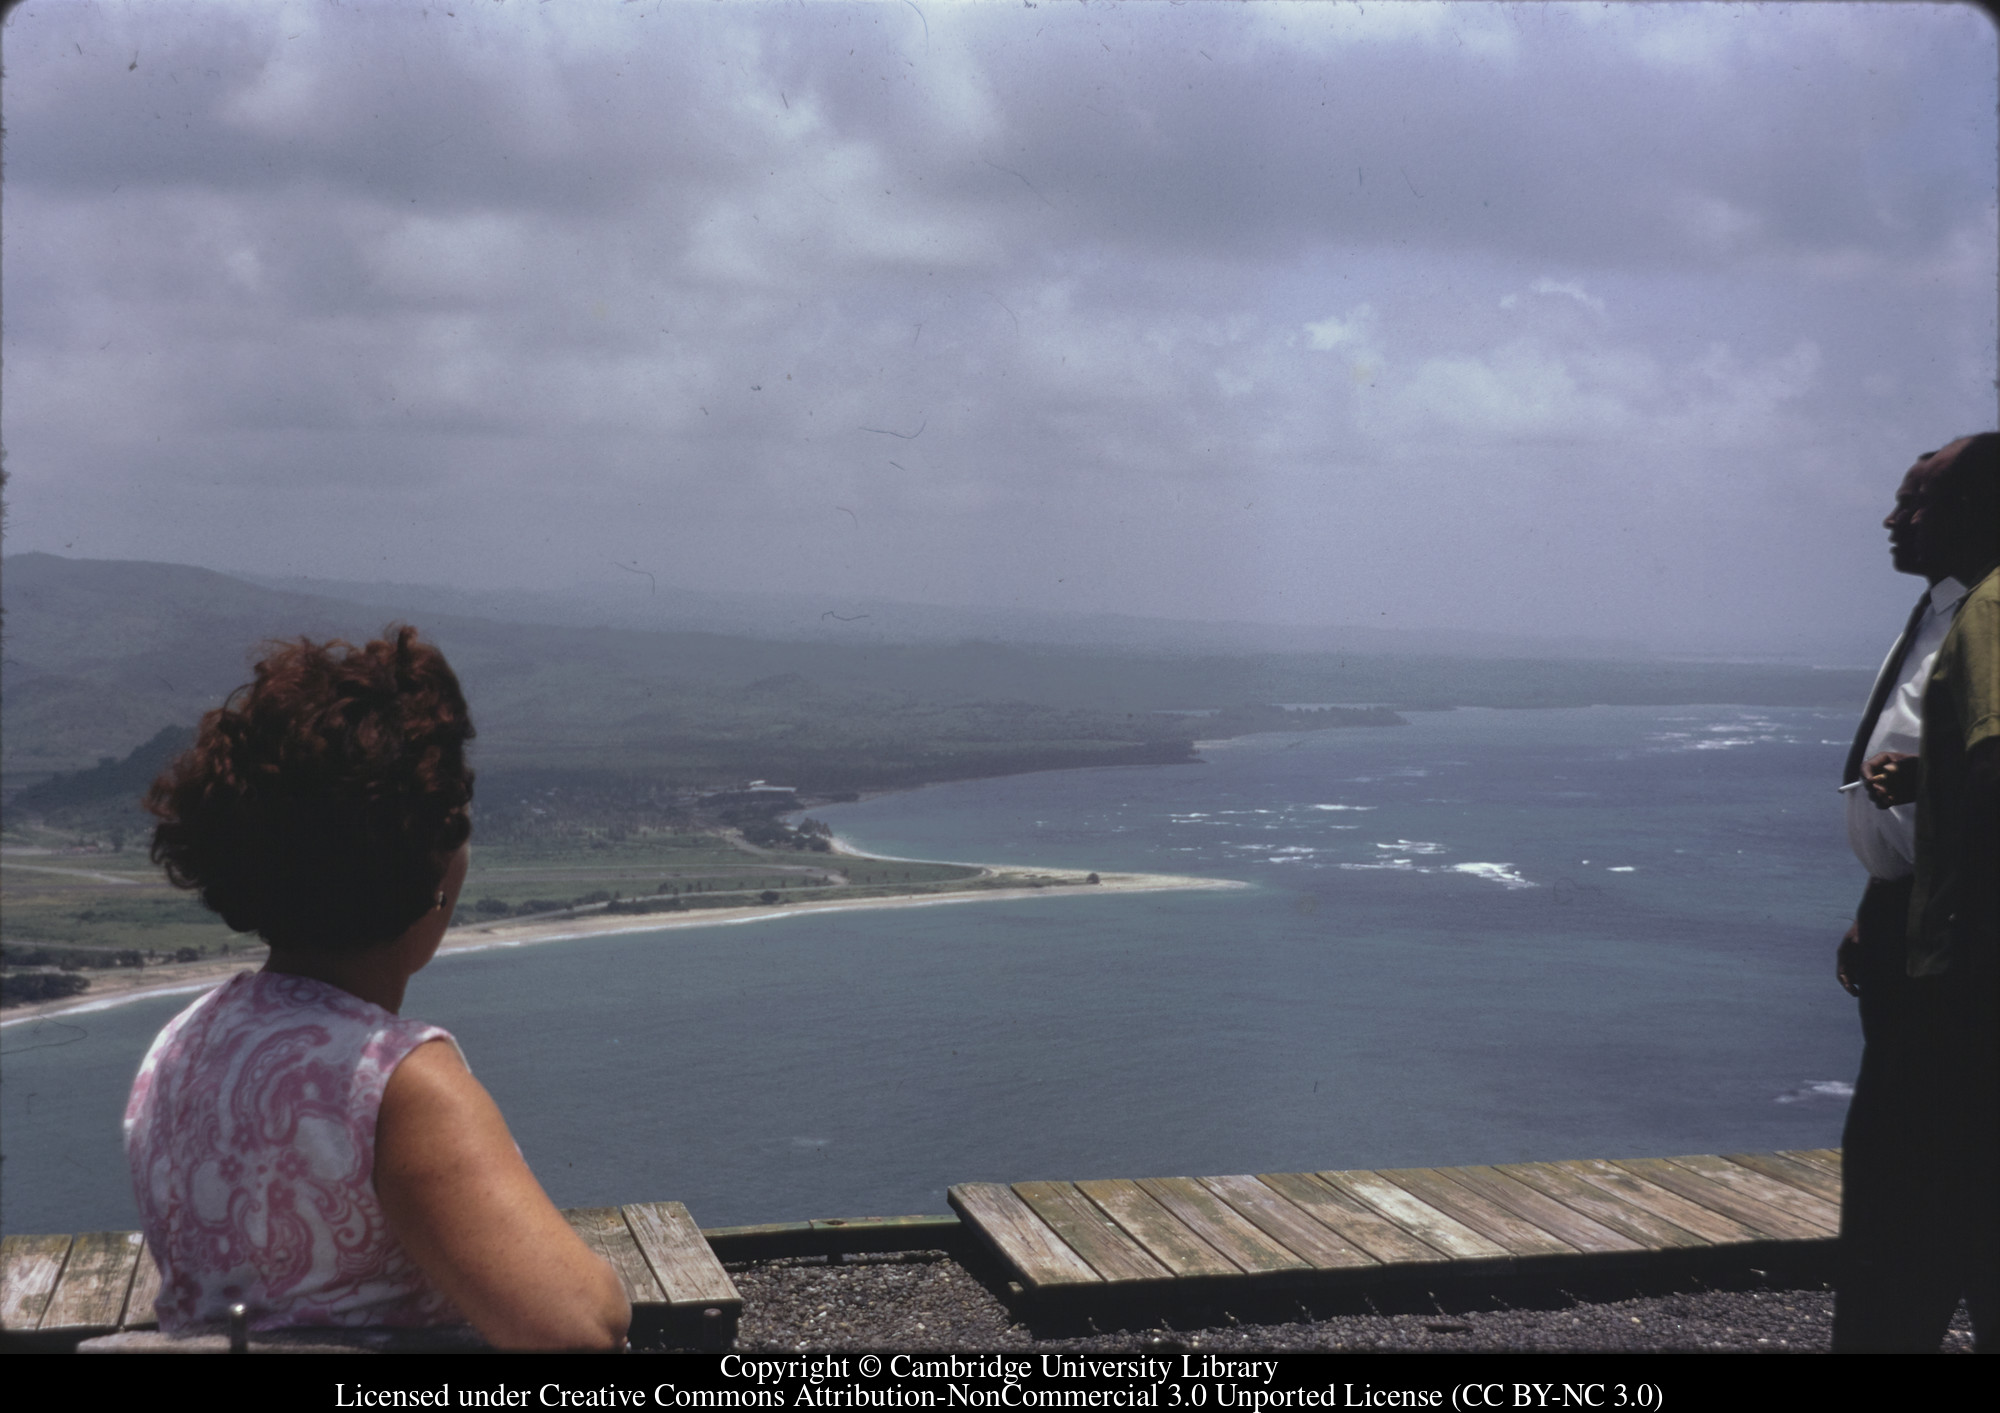 From Moule a Chique looking NE [i.e. north-east], 1970-09